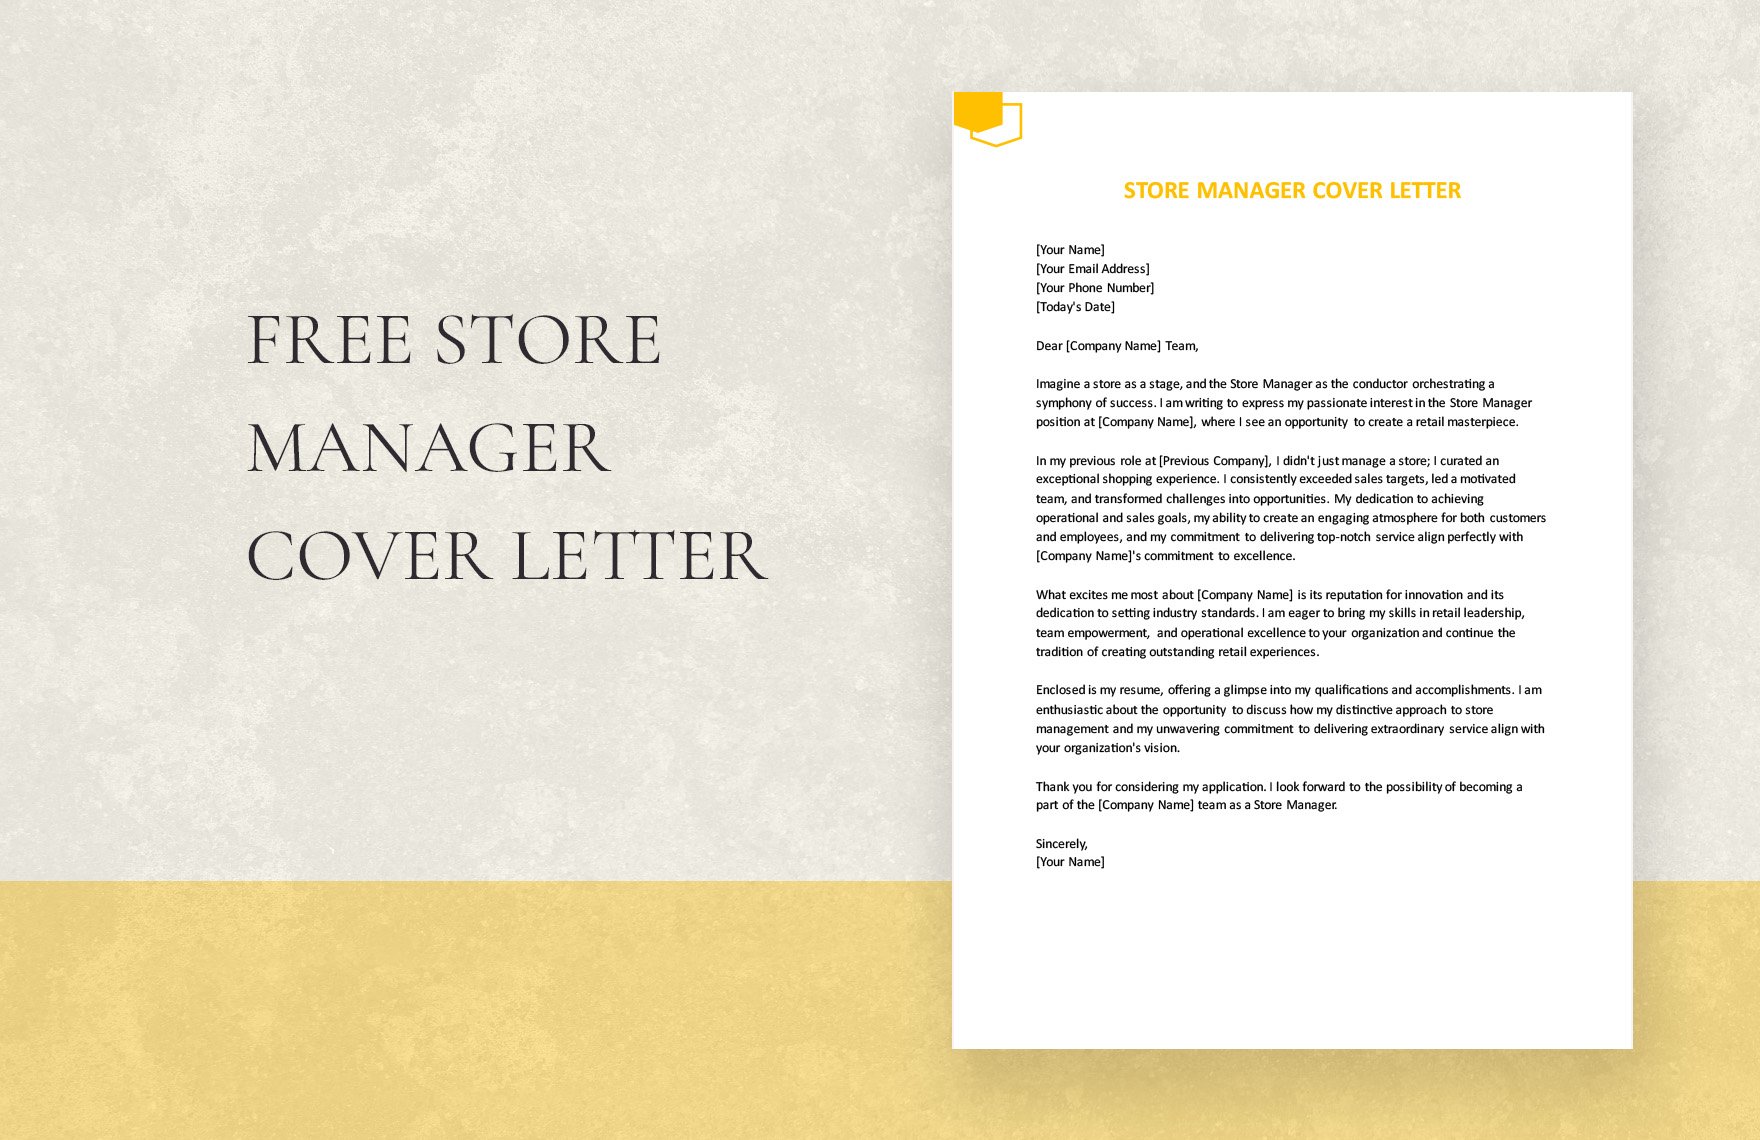 Store Manager Cover Letter in Word, Google Docs, PDF